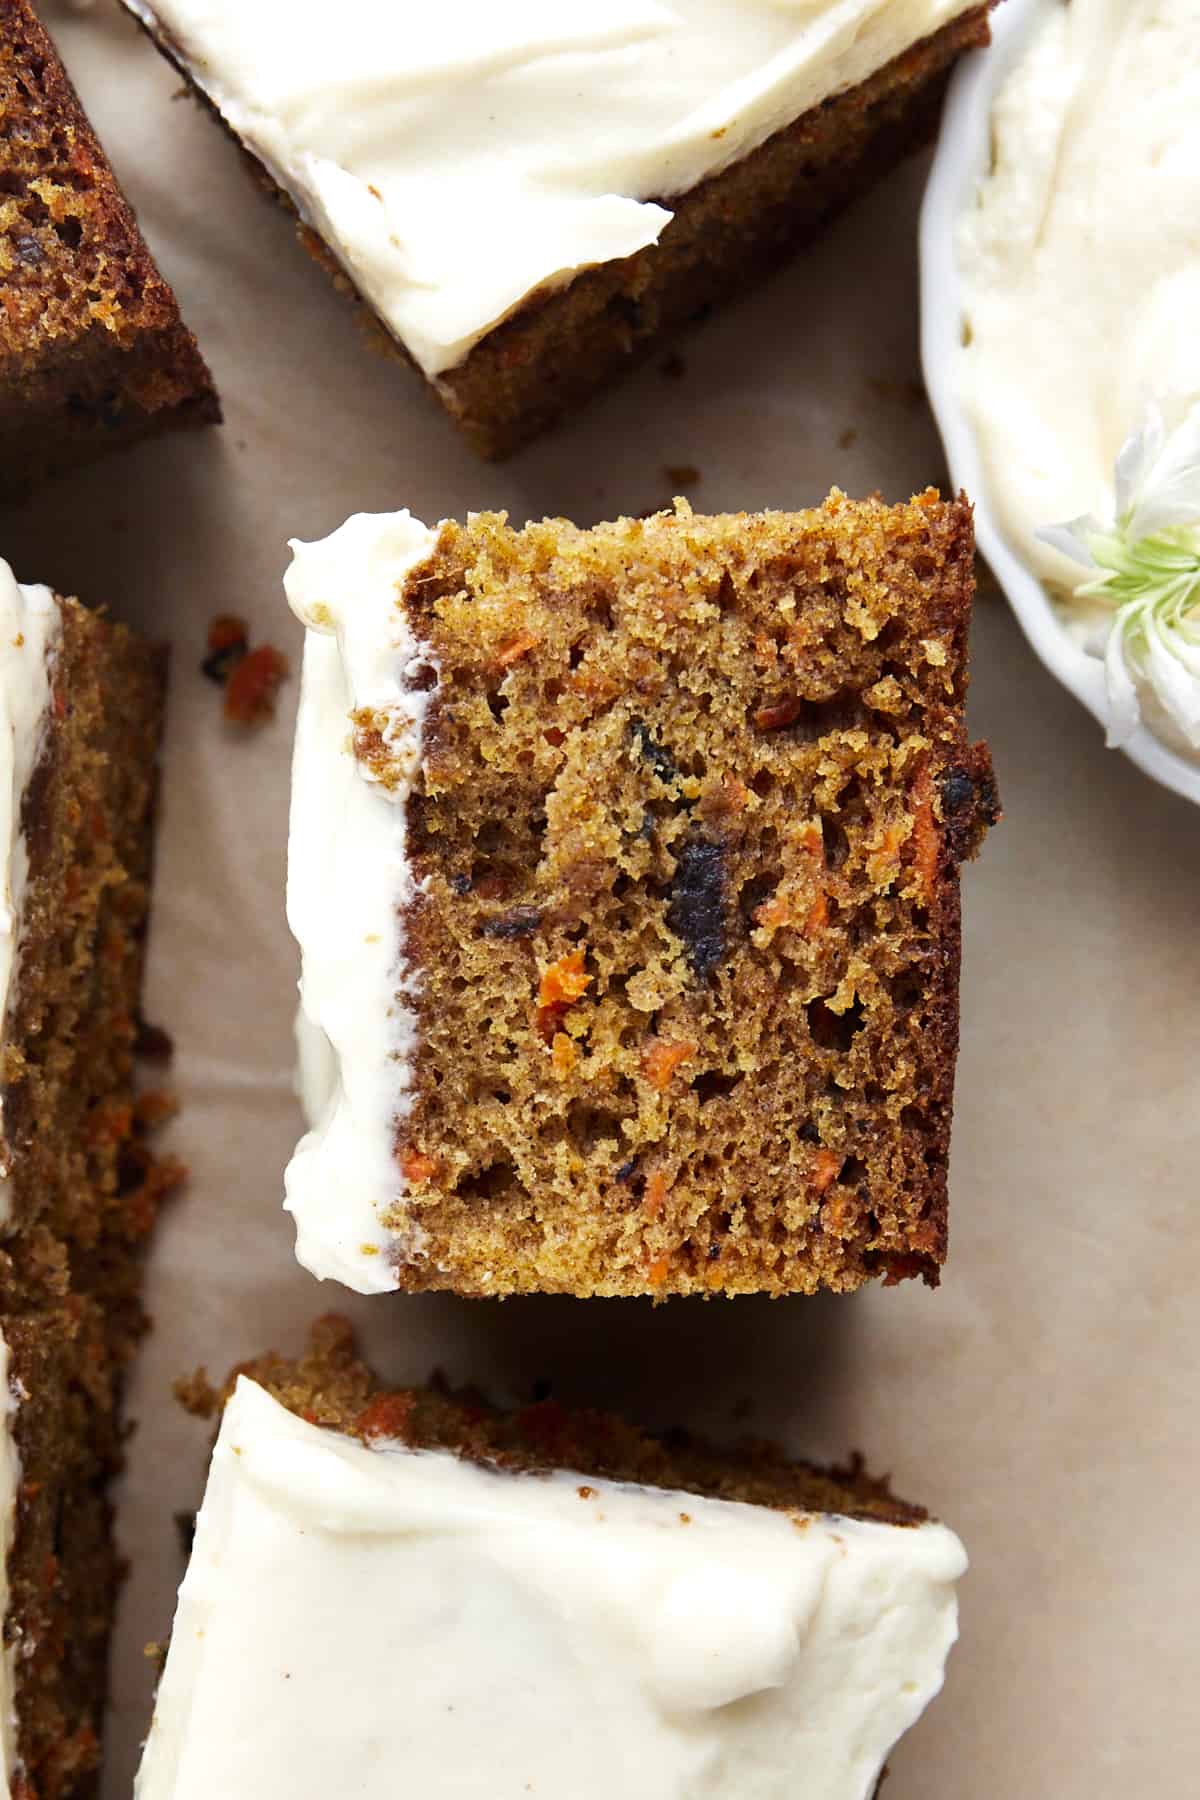 Side view of a piece of carrot cake topped with cream cheese frosting showing the shredded carrots and nuts in the batter. 